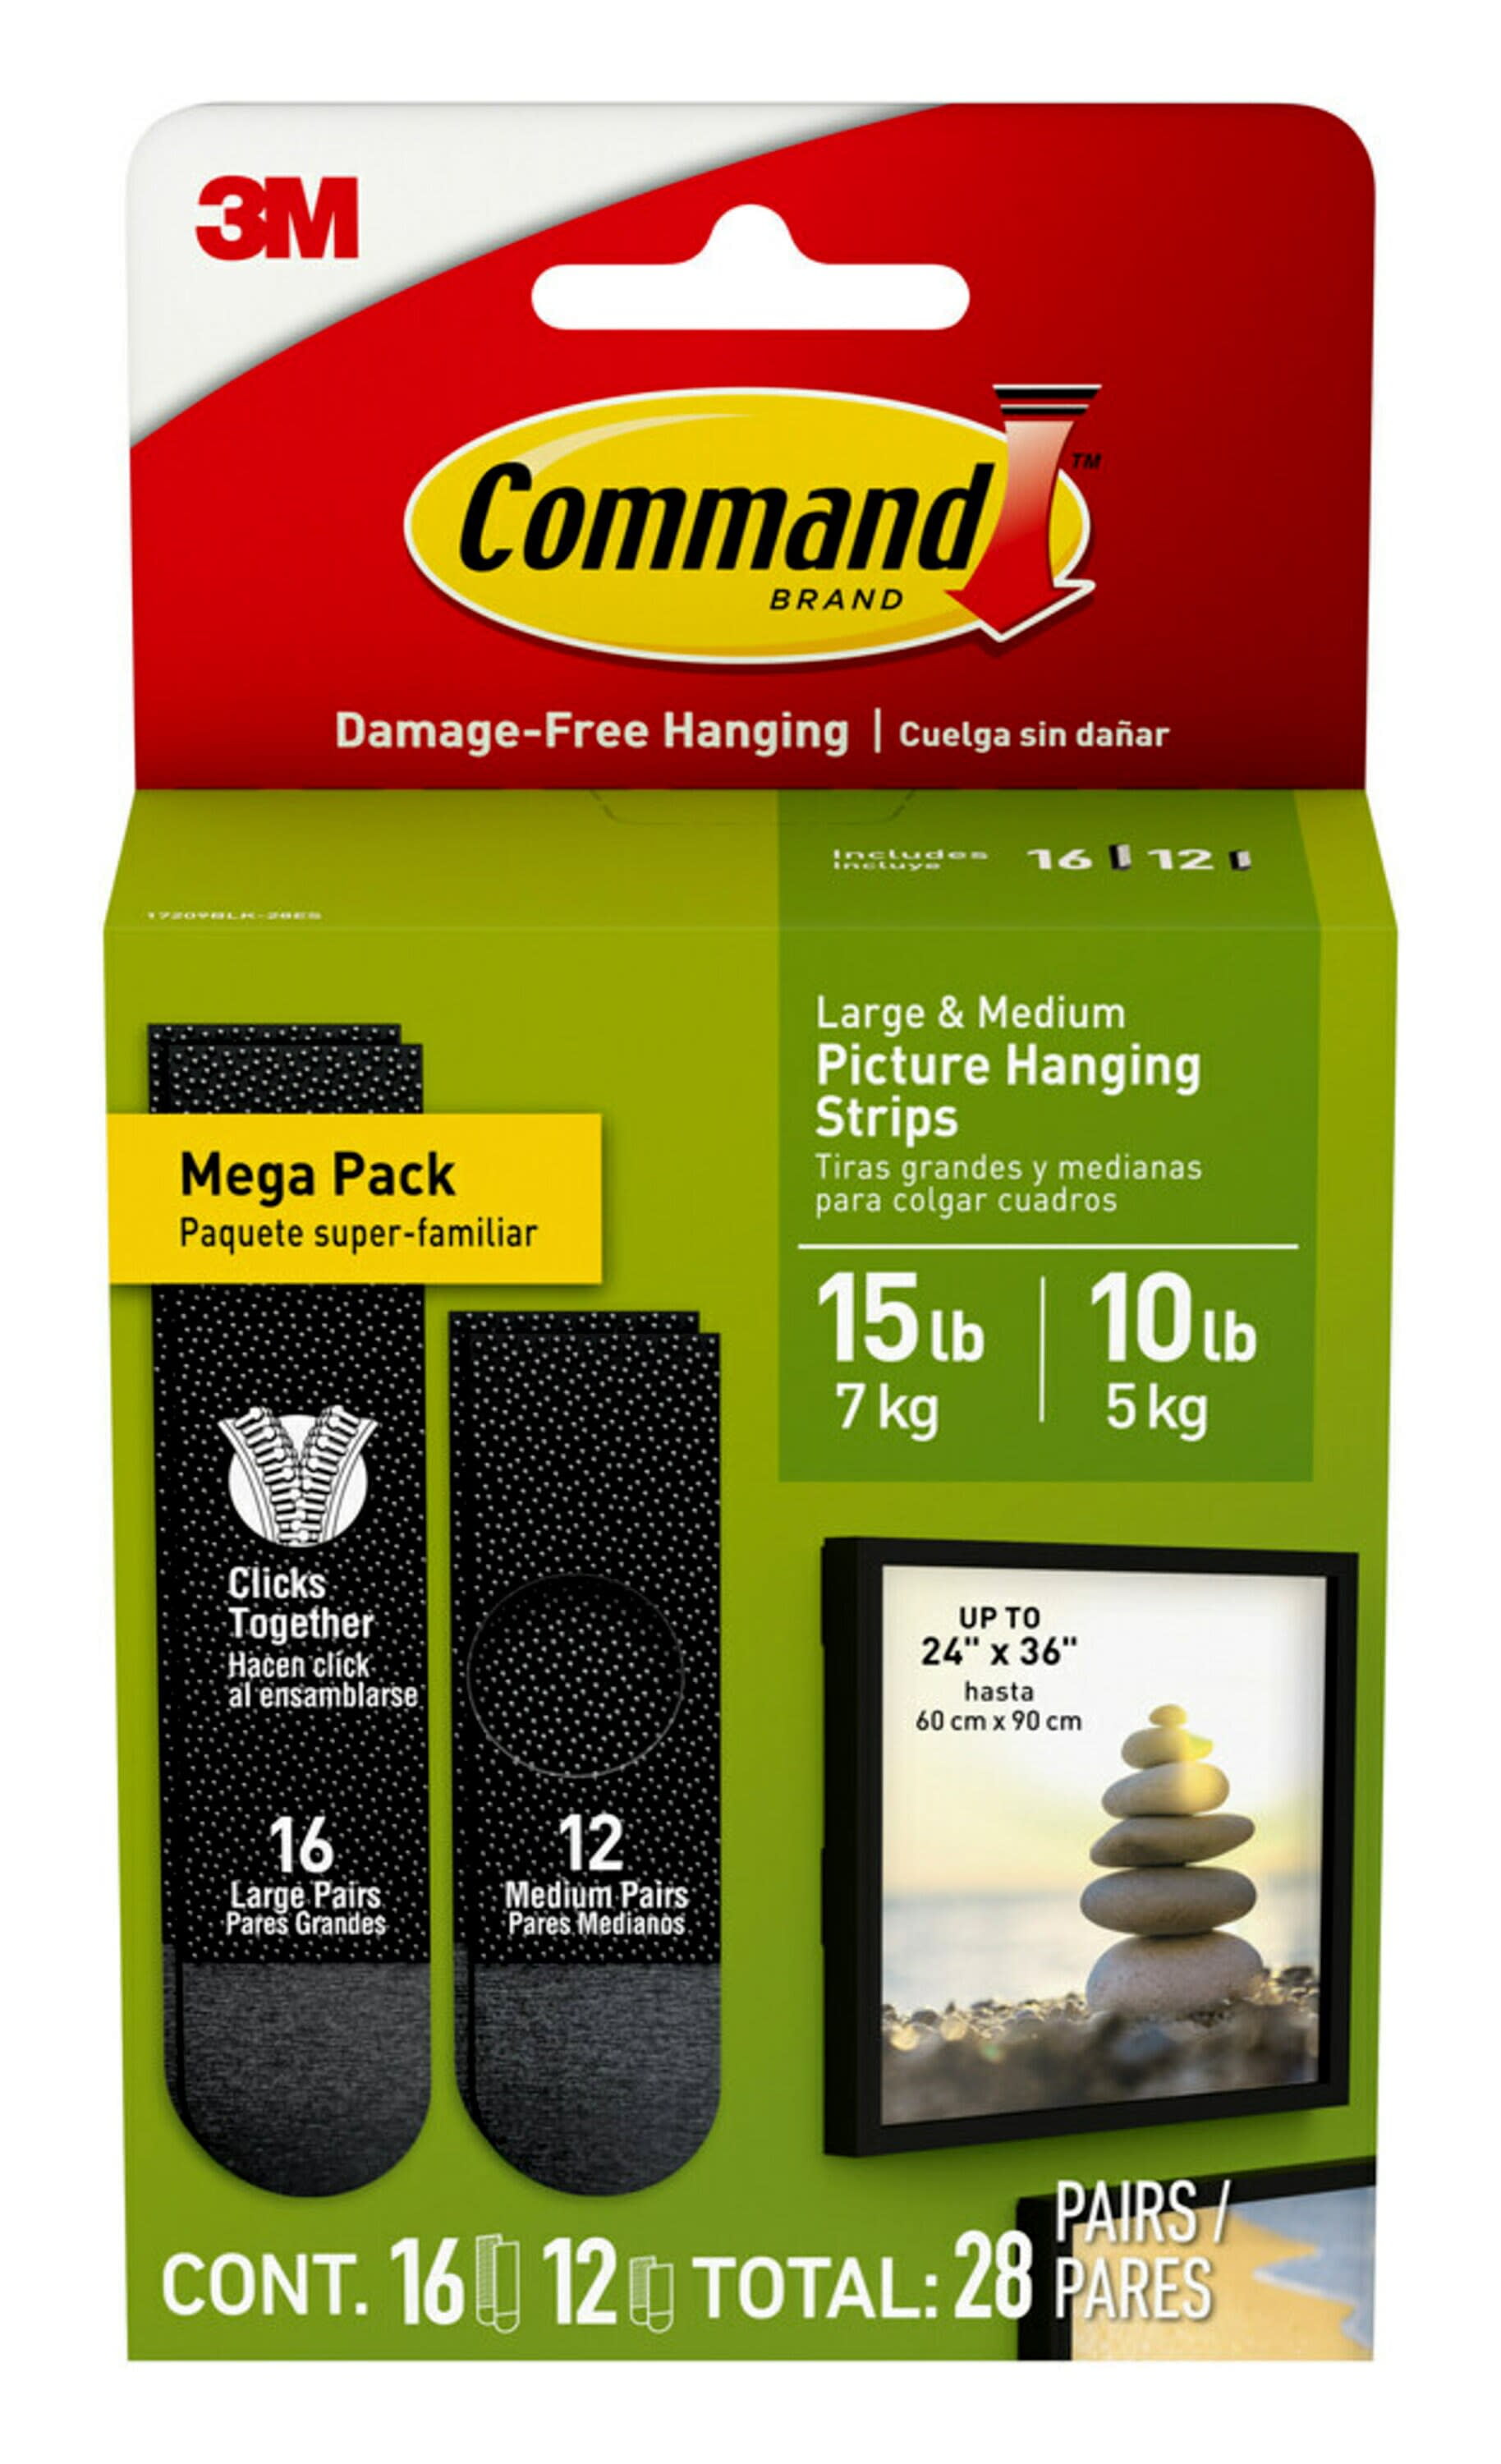  Command Medium Picture Hanging Strips, Damage Free Hanging  Picture Hangers, No Tools Wall Hanging Strips for Living Spaces, 16 Black  Adhesive Strip Pairs(32 Command Strips) : Industrial & Scientific